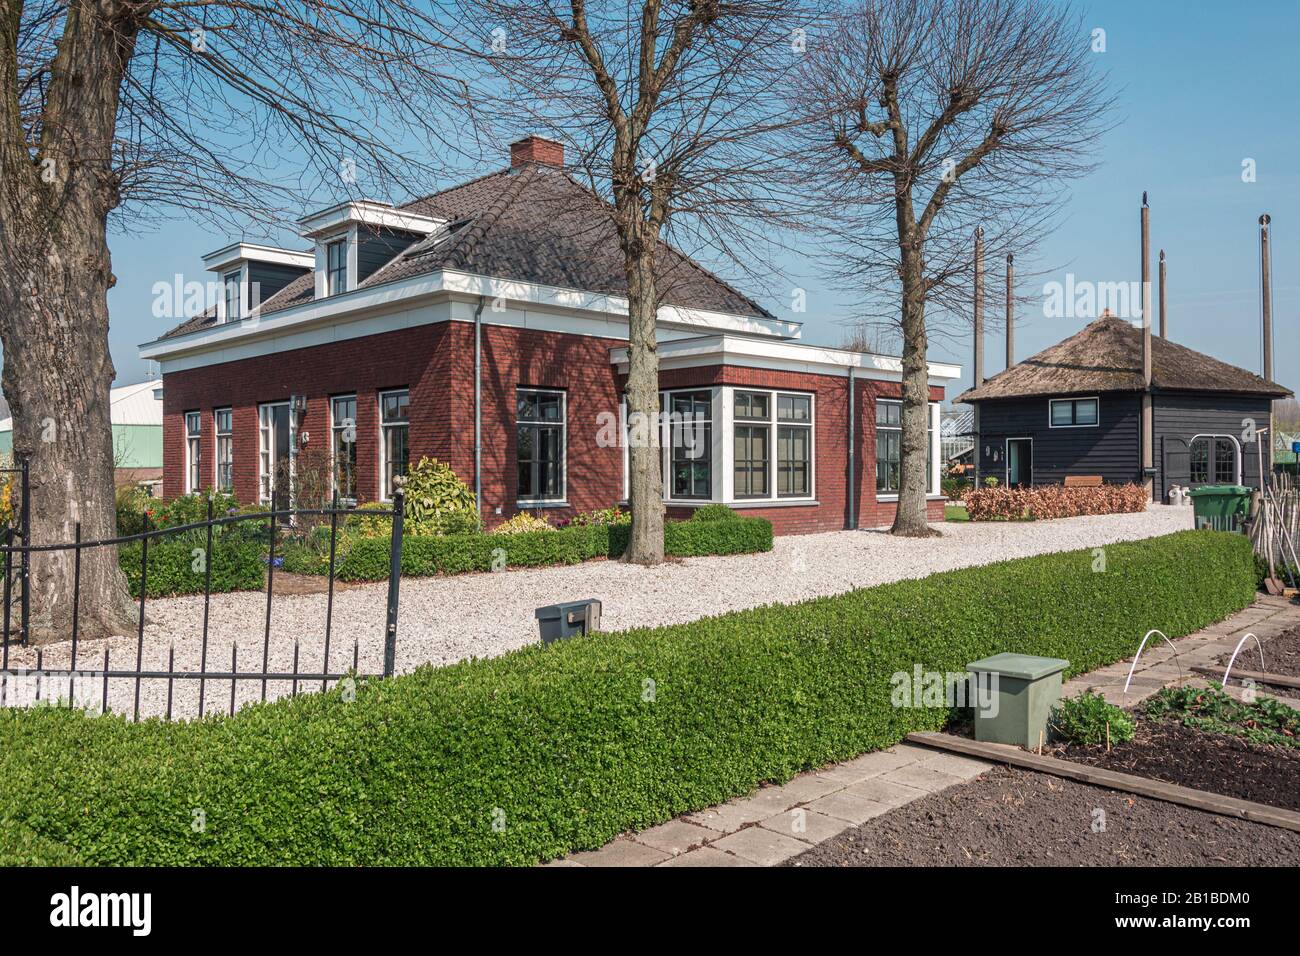 Nootdorp, The Netherlands, April 7, 2019:  Beautiful bungalow  with kitchen garden and a hay loft converted into a home situated between huge greenhou Stock Photo